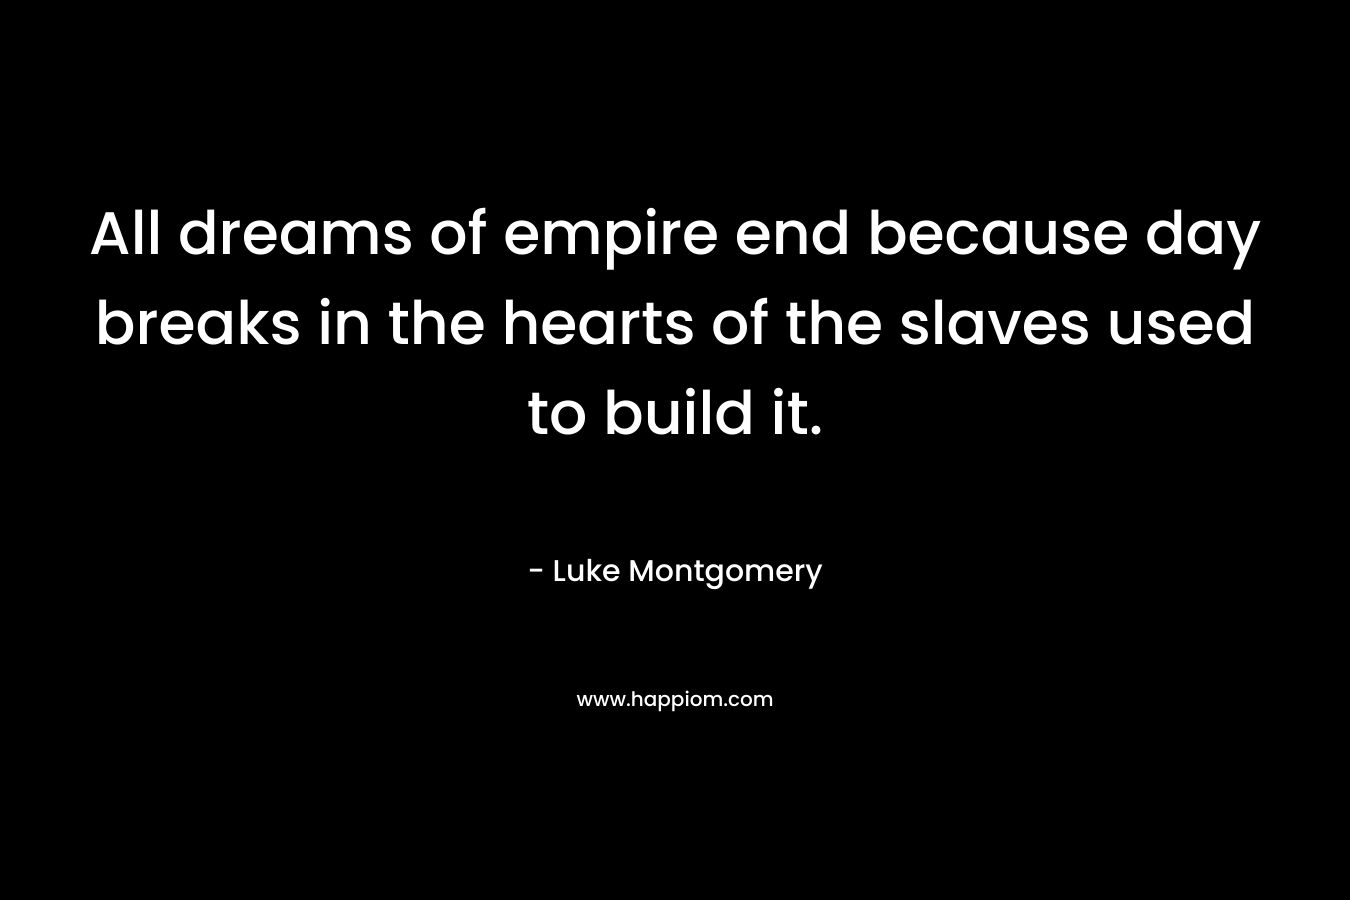 All dreams of empire end because day breaks in the hearts of the slaves used to build it.